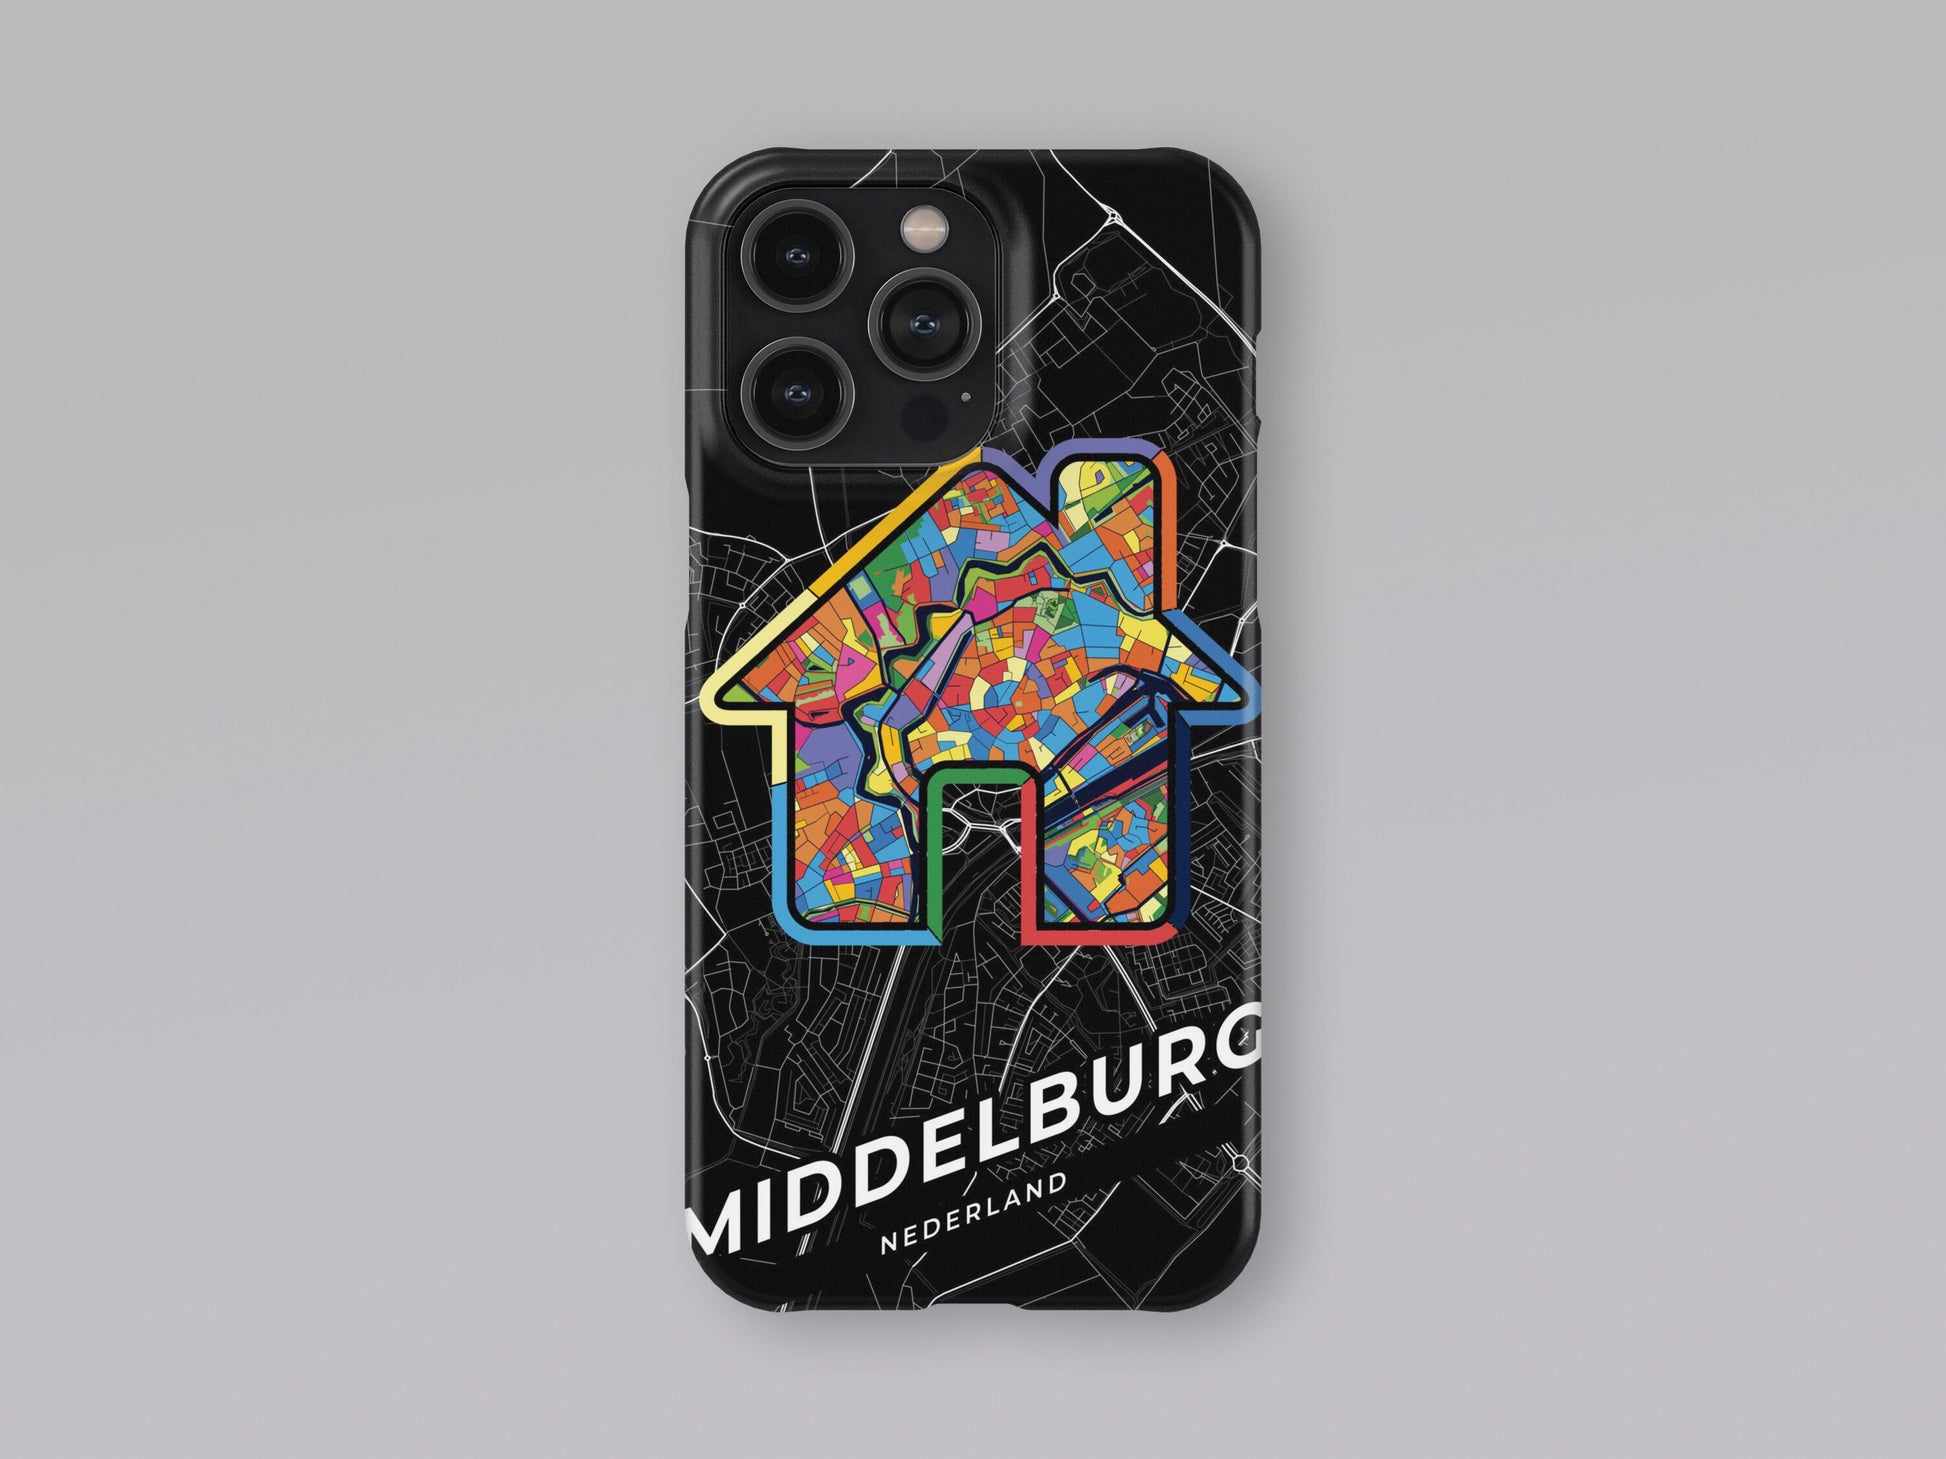 Middelburg Netherlands slim phone case with colorful icon 3